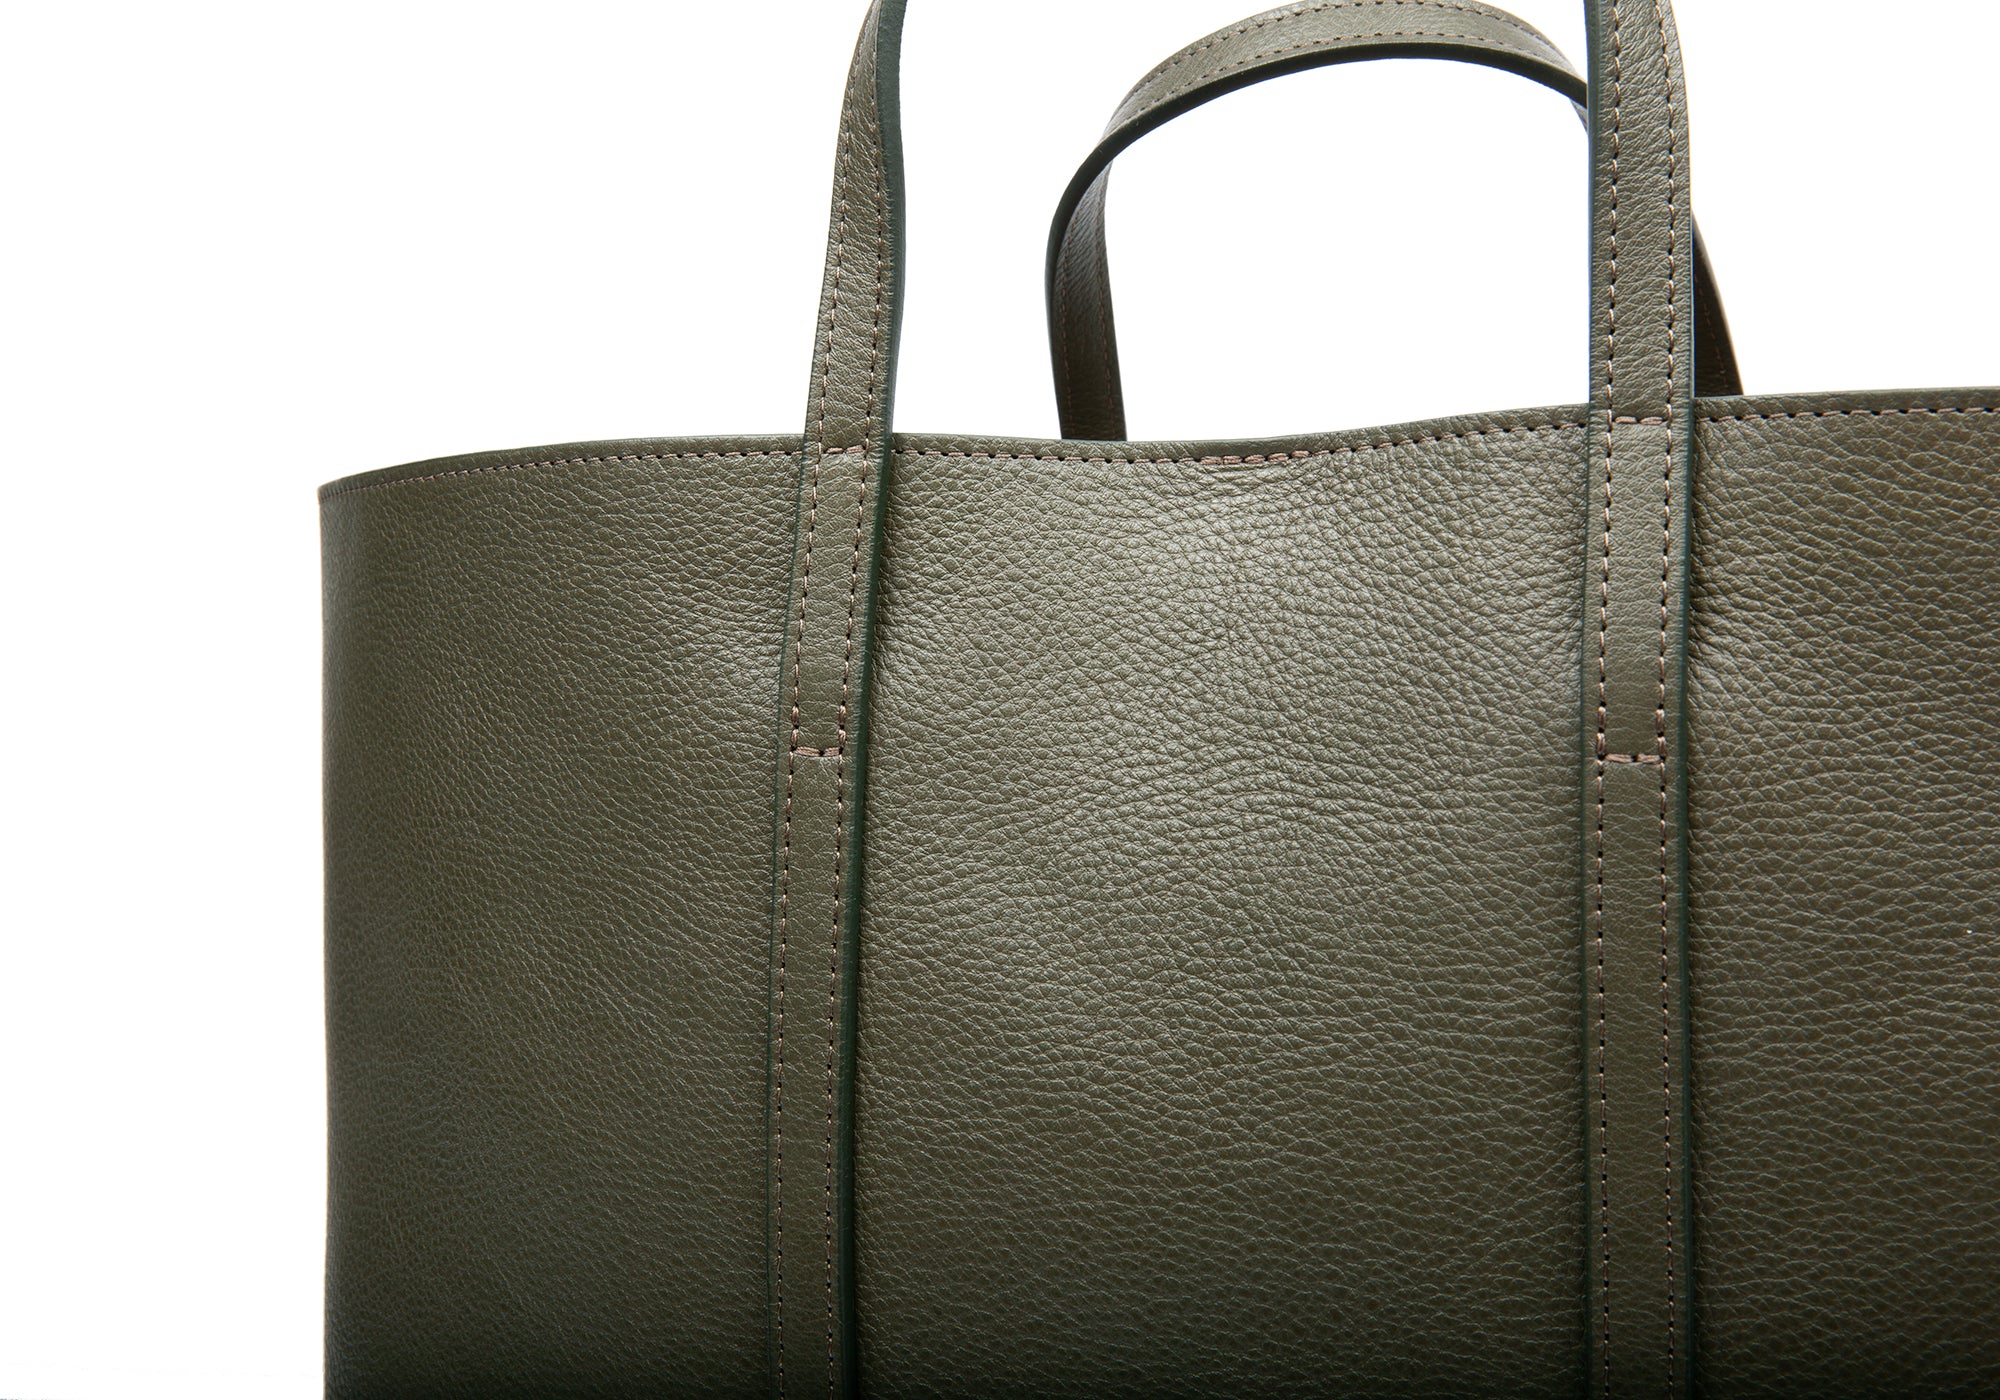 The Morris Leather Tote Olive